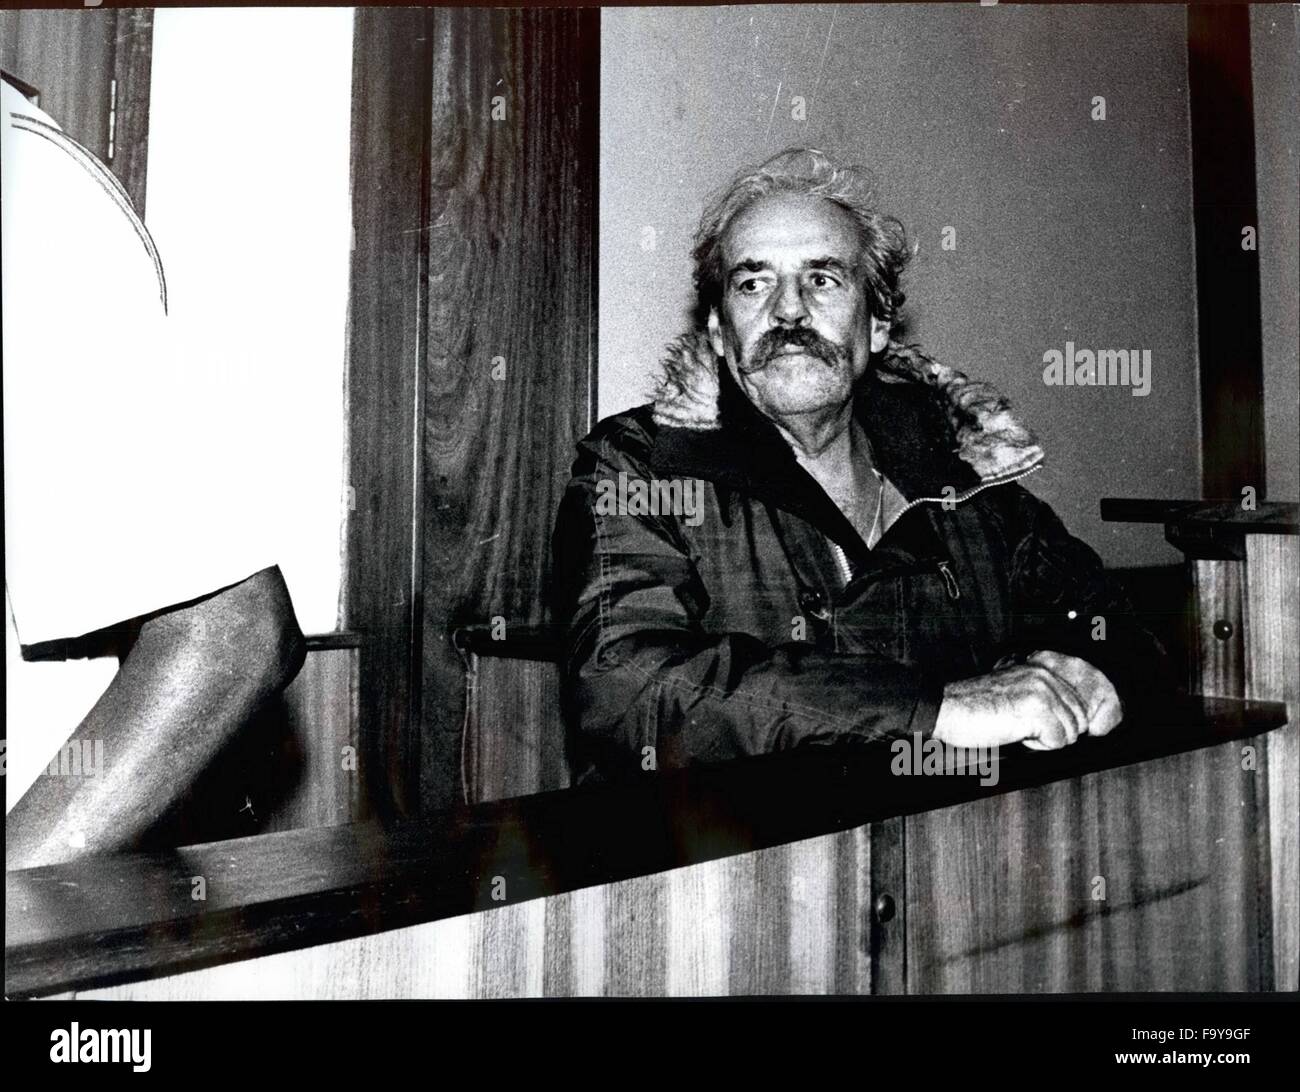 1972 - Astle Uganda Major Bob Astle in the docks at Kampala High Courts where he is being tried for murder. Astle was a close advisor to Idi Amin the former Ugandan ruler. © Keystone Pictures USA/ZUMAPRESS.com/Alamy Live News Stock Photo